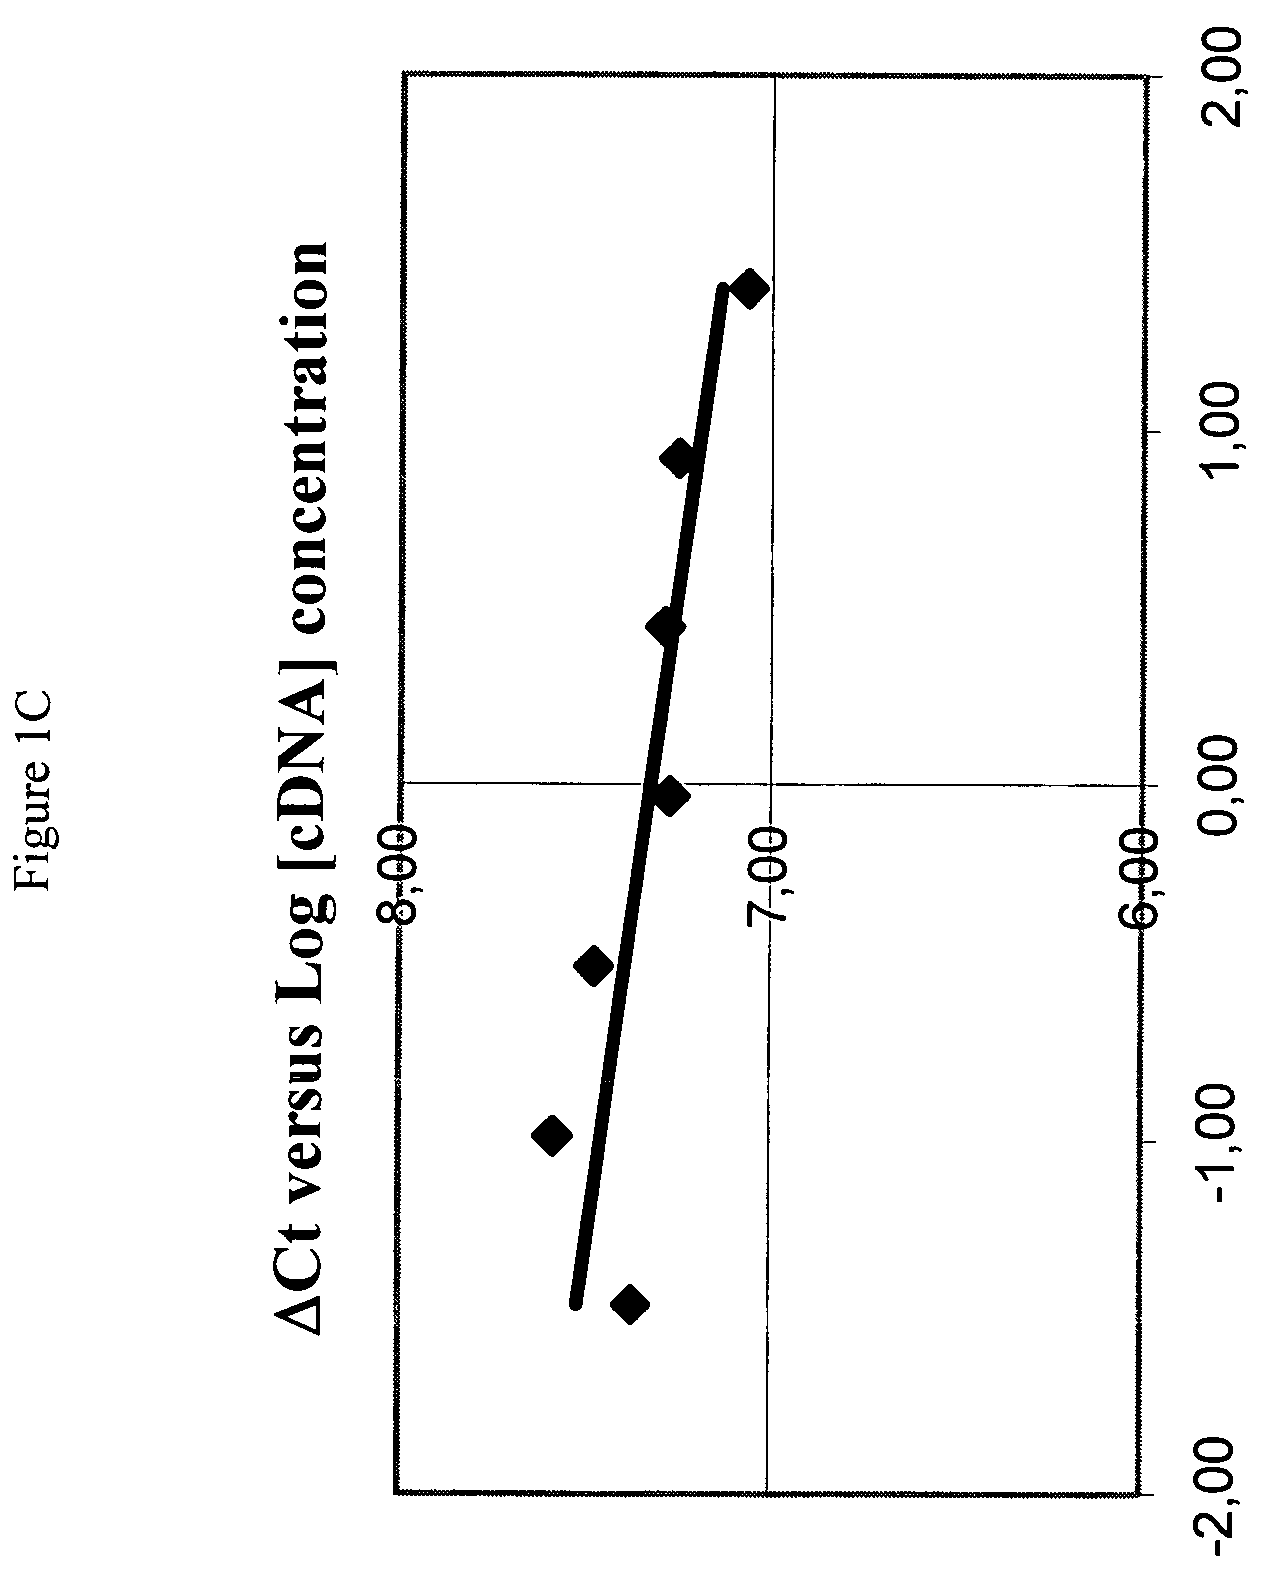 Method of determining a chemotherapeutic regimen for non small cell lung cancer based on BRCA1 expression